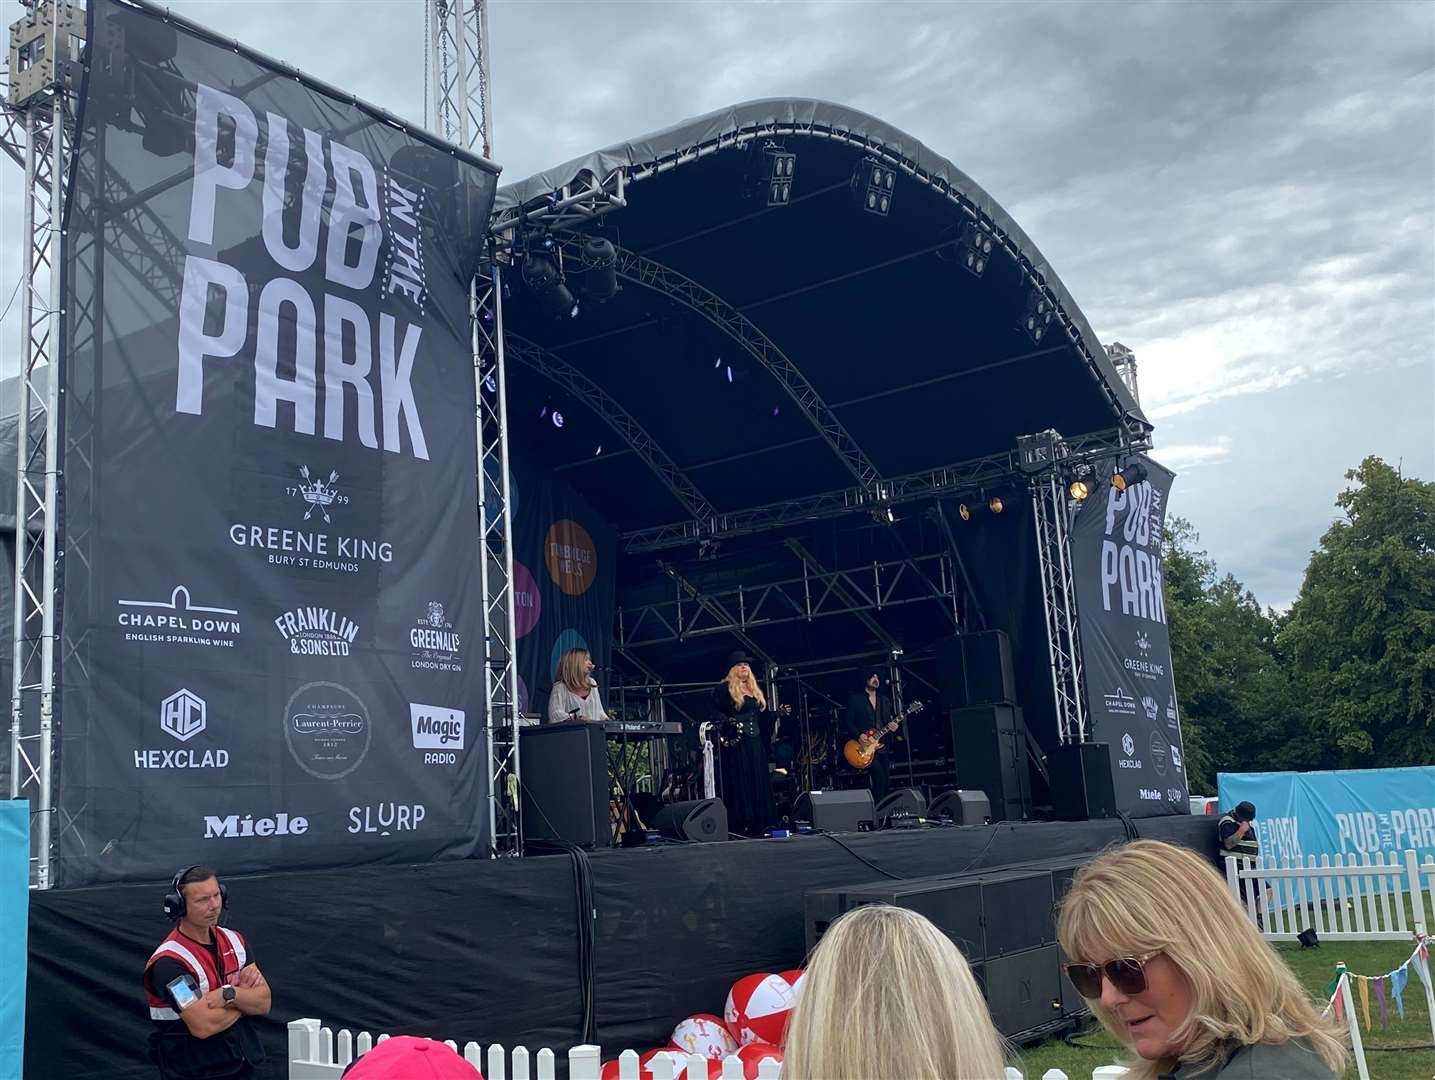 Tribute band Fleetwood Bac performed at Pub in the Park